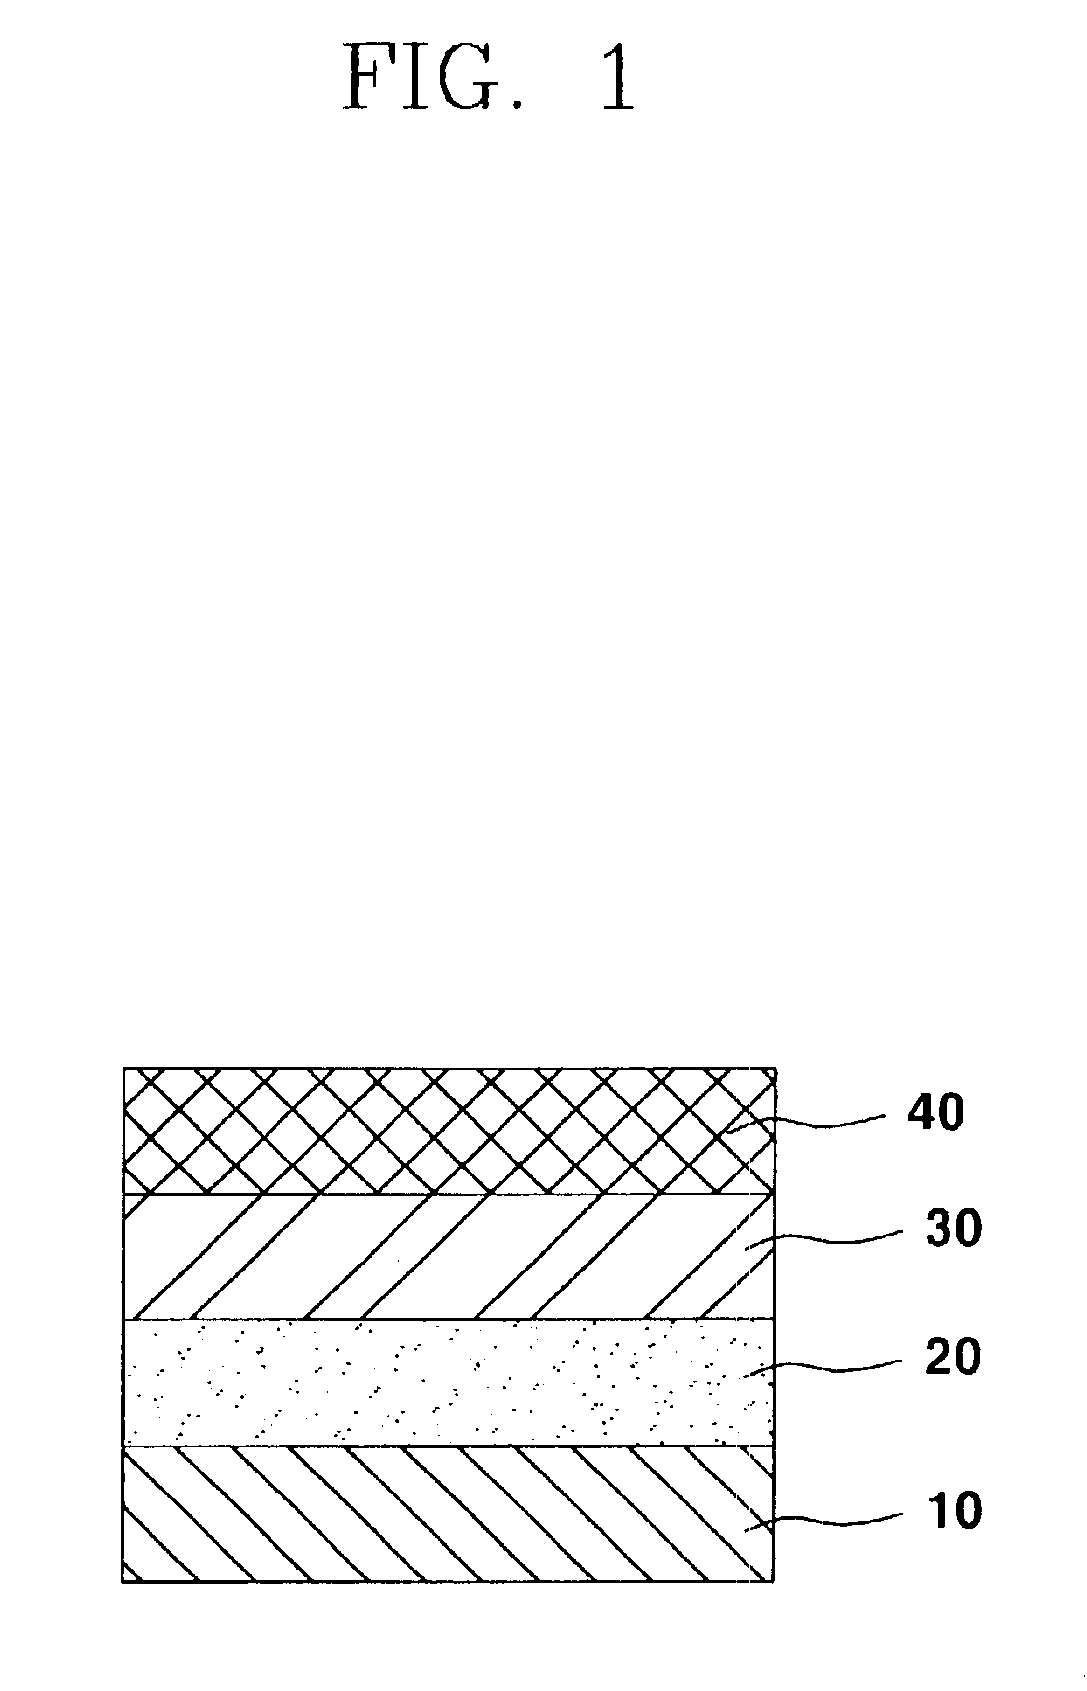 Transfer paper by heat able to dissolve a metal layer partially and the preparation method thereof